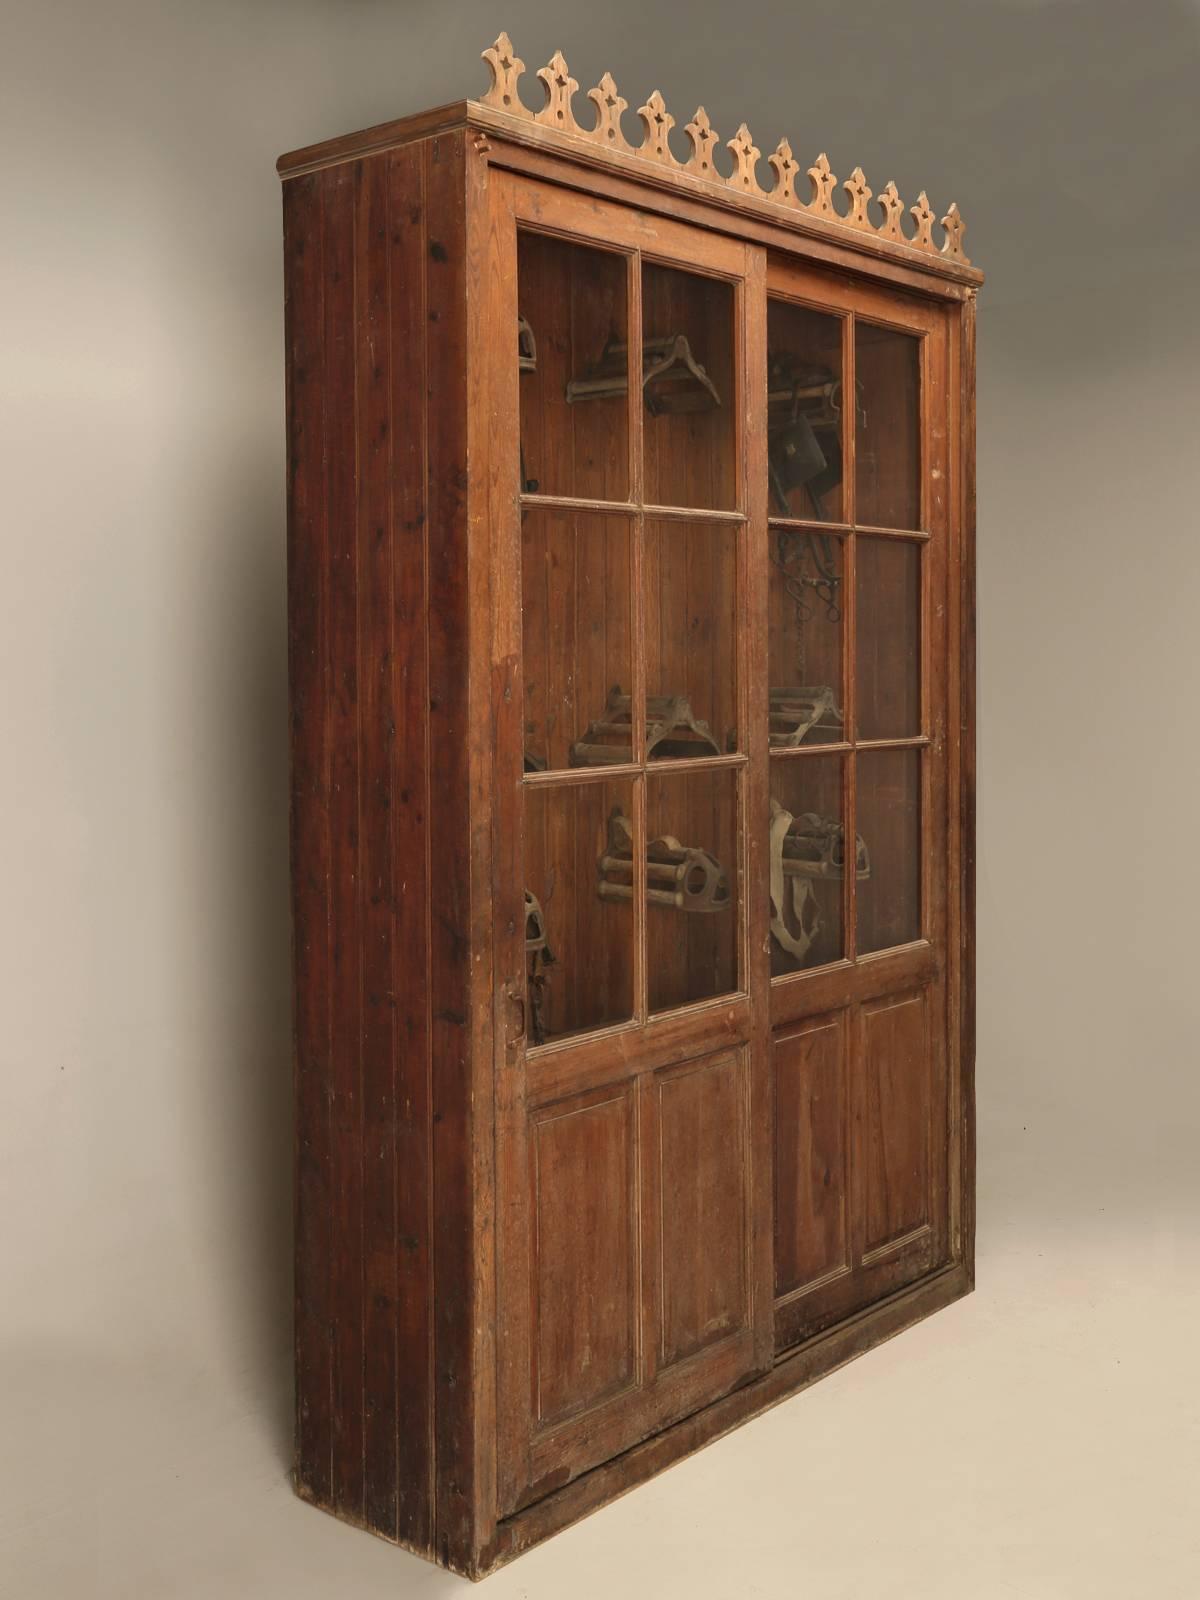 Antique Fitted French Tack Cabinet from a vineyard in the South of France near the town of Bezier, circa 1880-1900. The sliding doors still have their handmade French wavy glass, and we have gone through an exhaustive sympathetic restoration, while